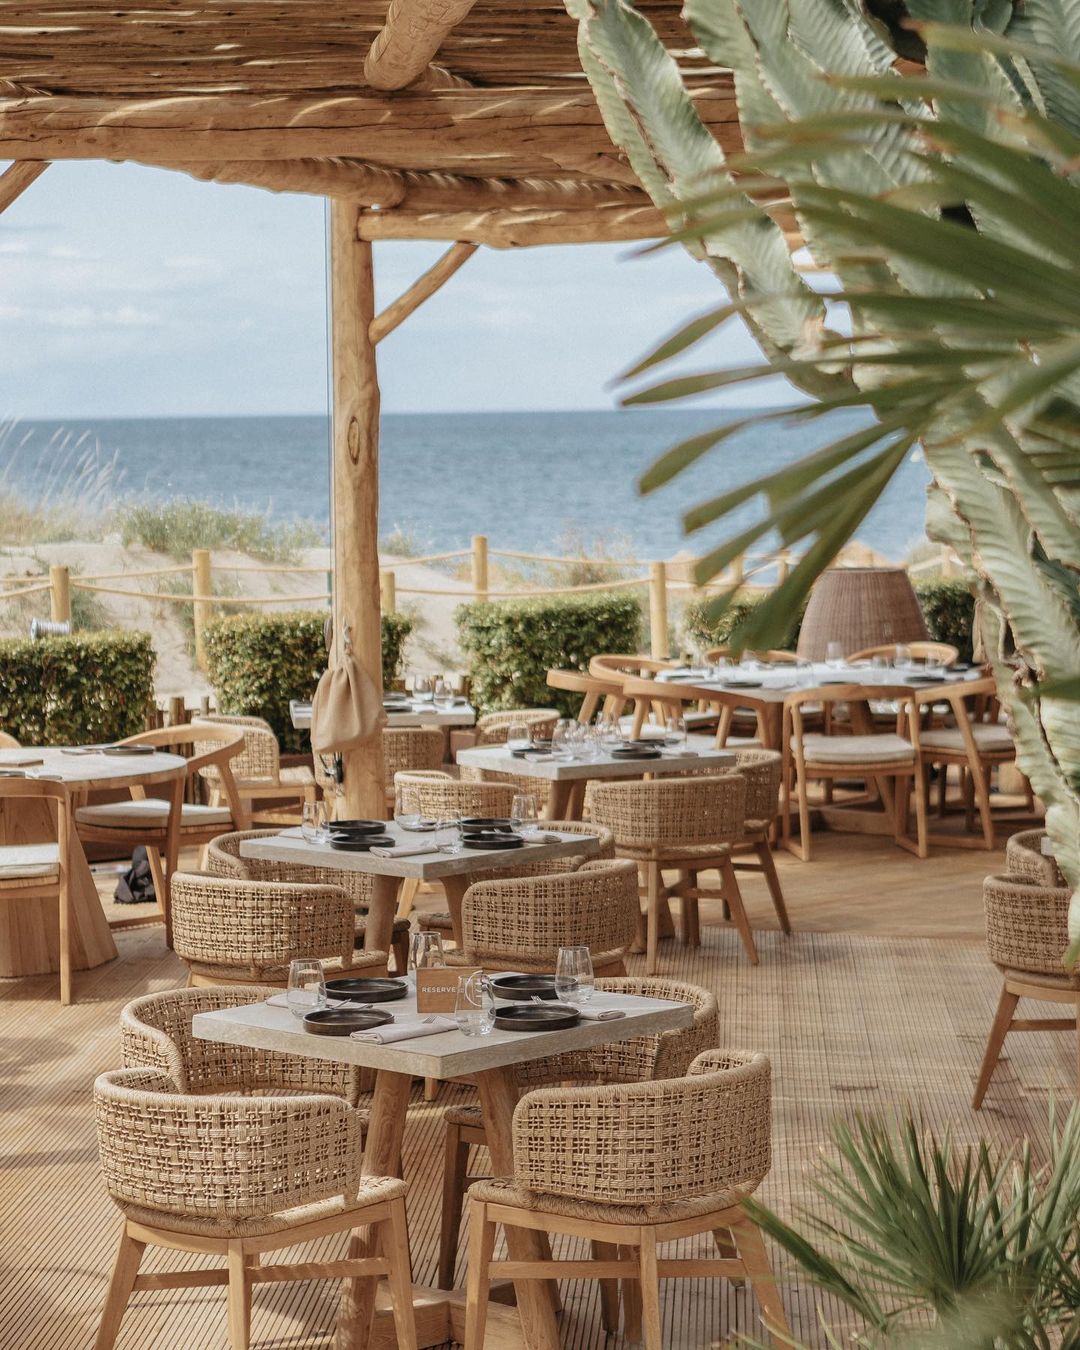 Lunch with a stunning view at Dune Beach Marbella